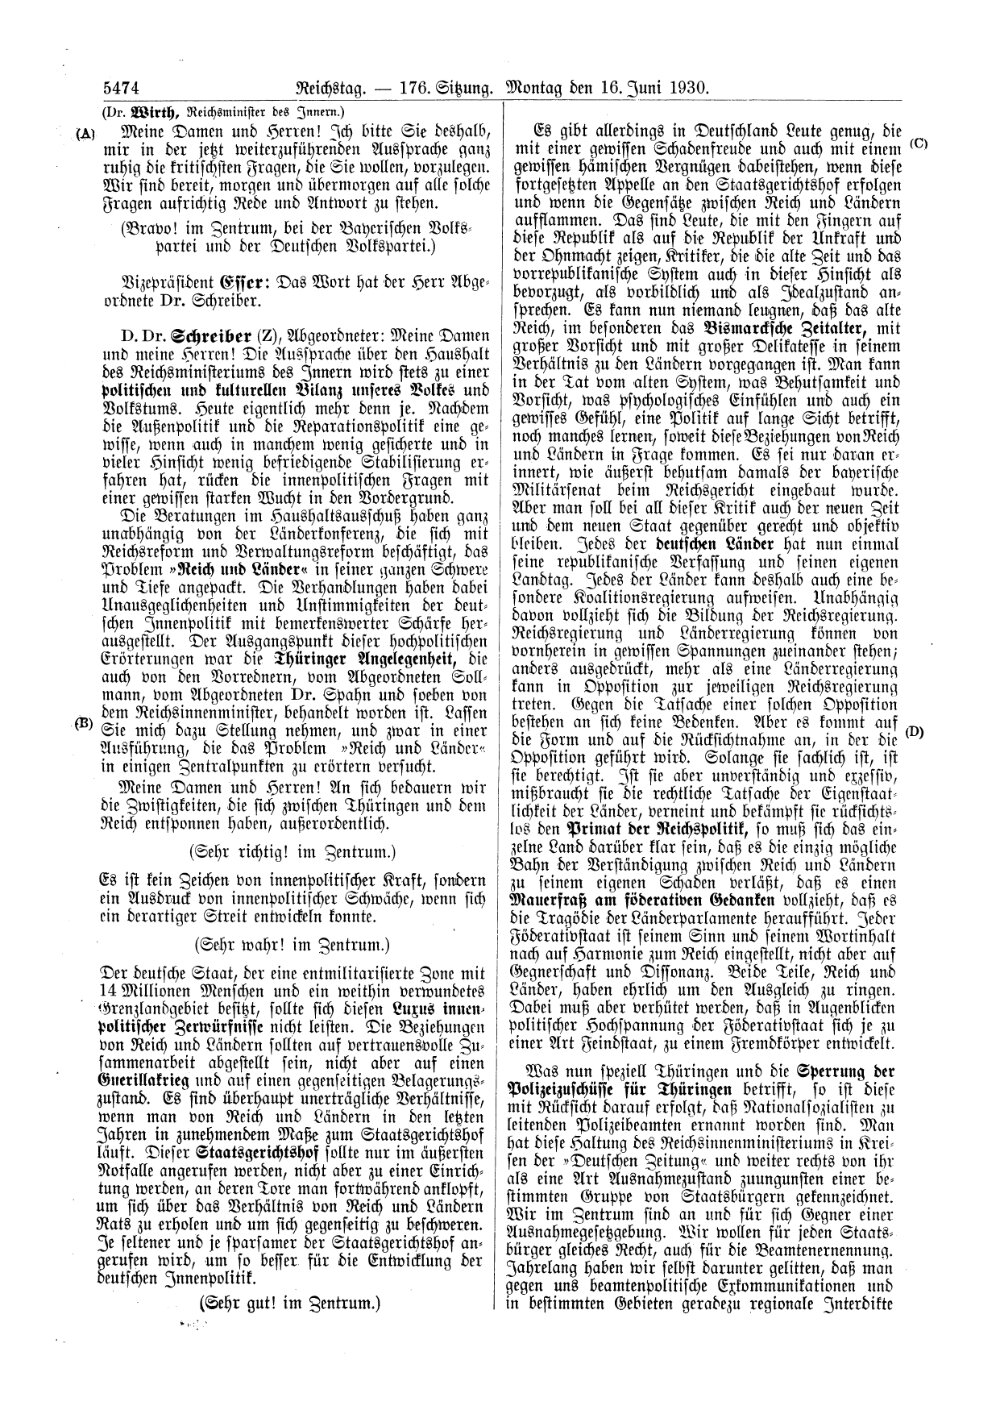 Scan of page 5474